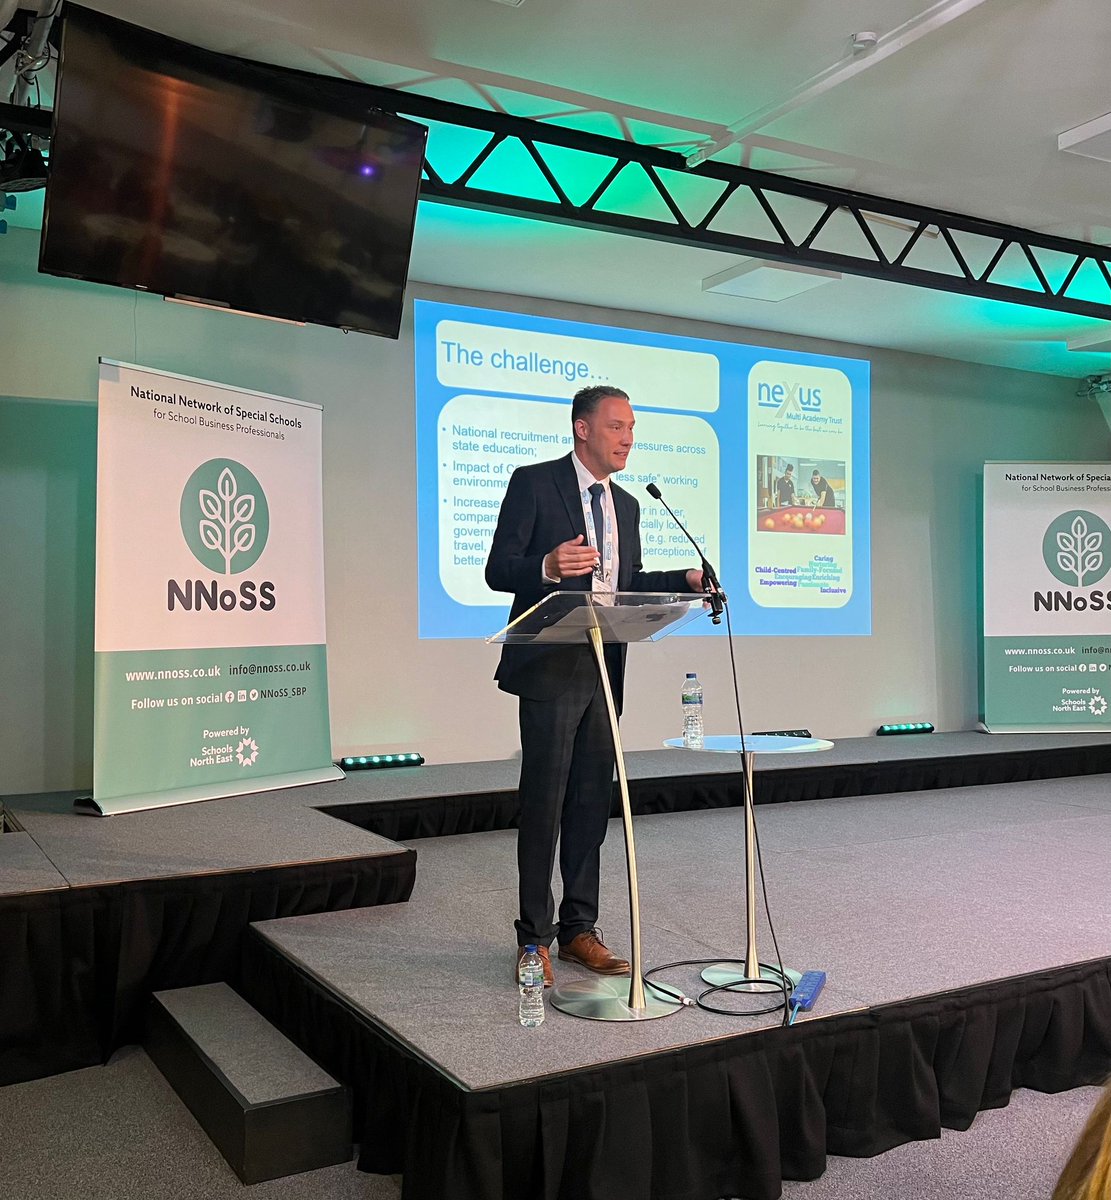 Now in the auditorium for session round one #NNoSSConference24. Warren Carratt, CEO of @NexusMat, is exploring flexible working within the special school system, providing real examples of how some schools have utilised this approach to enhance recruitment and retention. ✍️✍️✍️